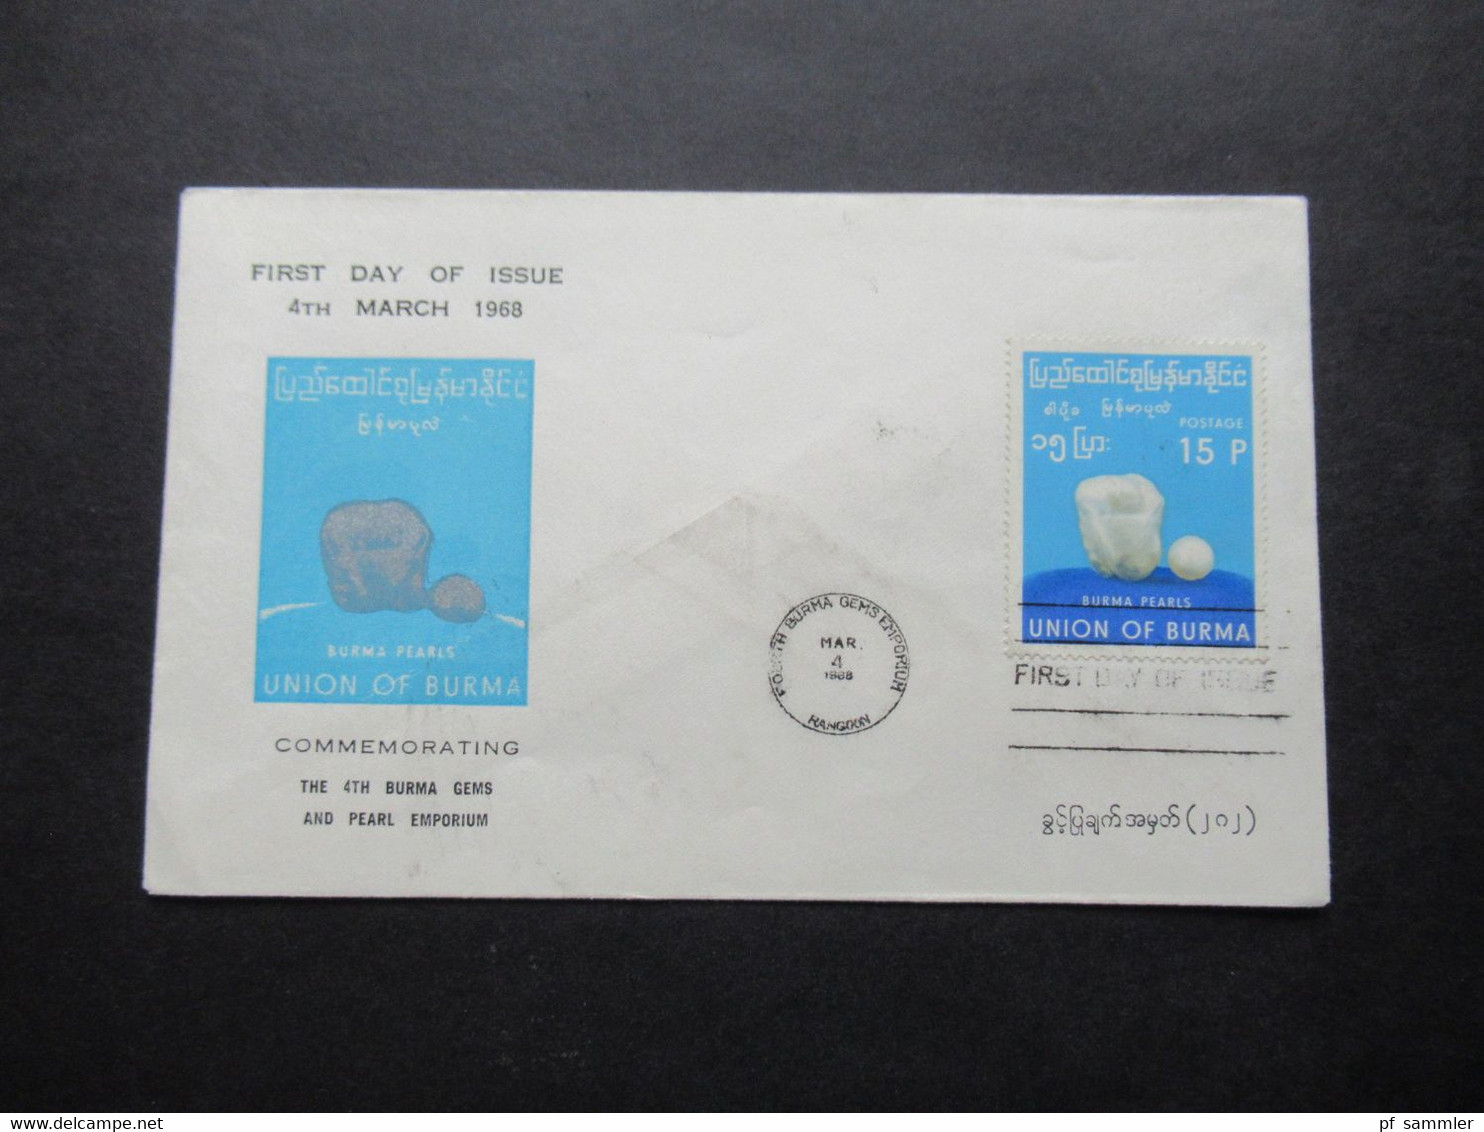 Asien Union of Burma / Burma 1969 FDC Peasant's Day und 1968 Commemmorating the 4th Burma Gems and Pearl Emporium